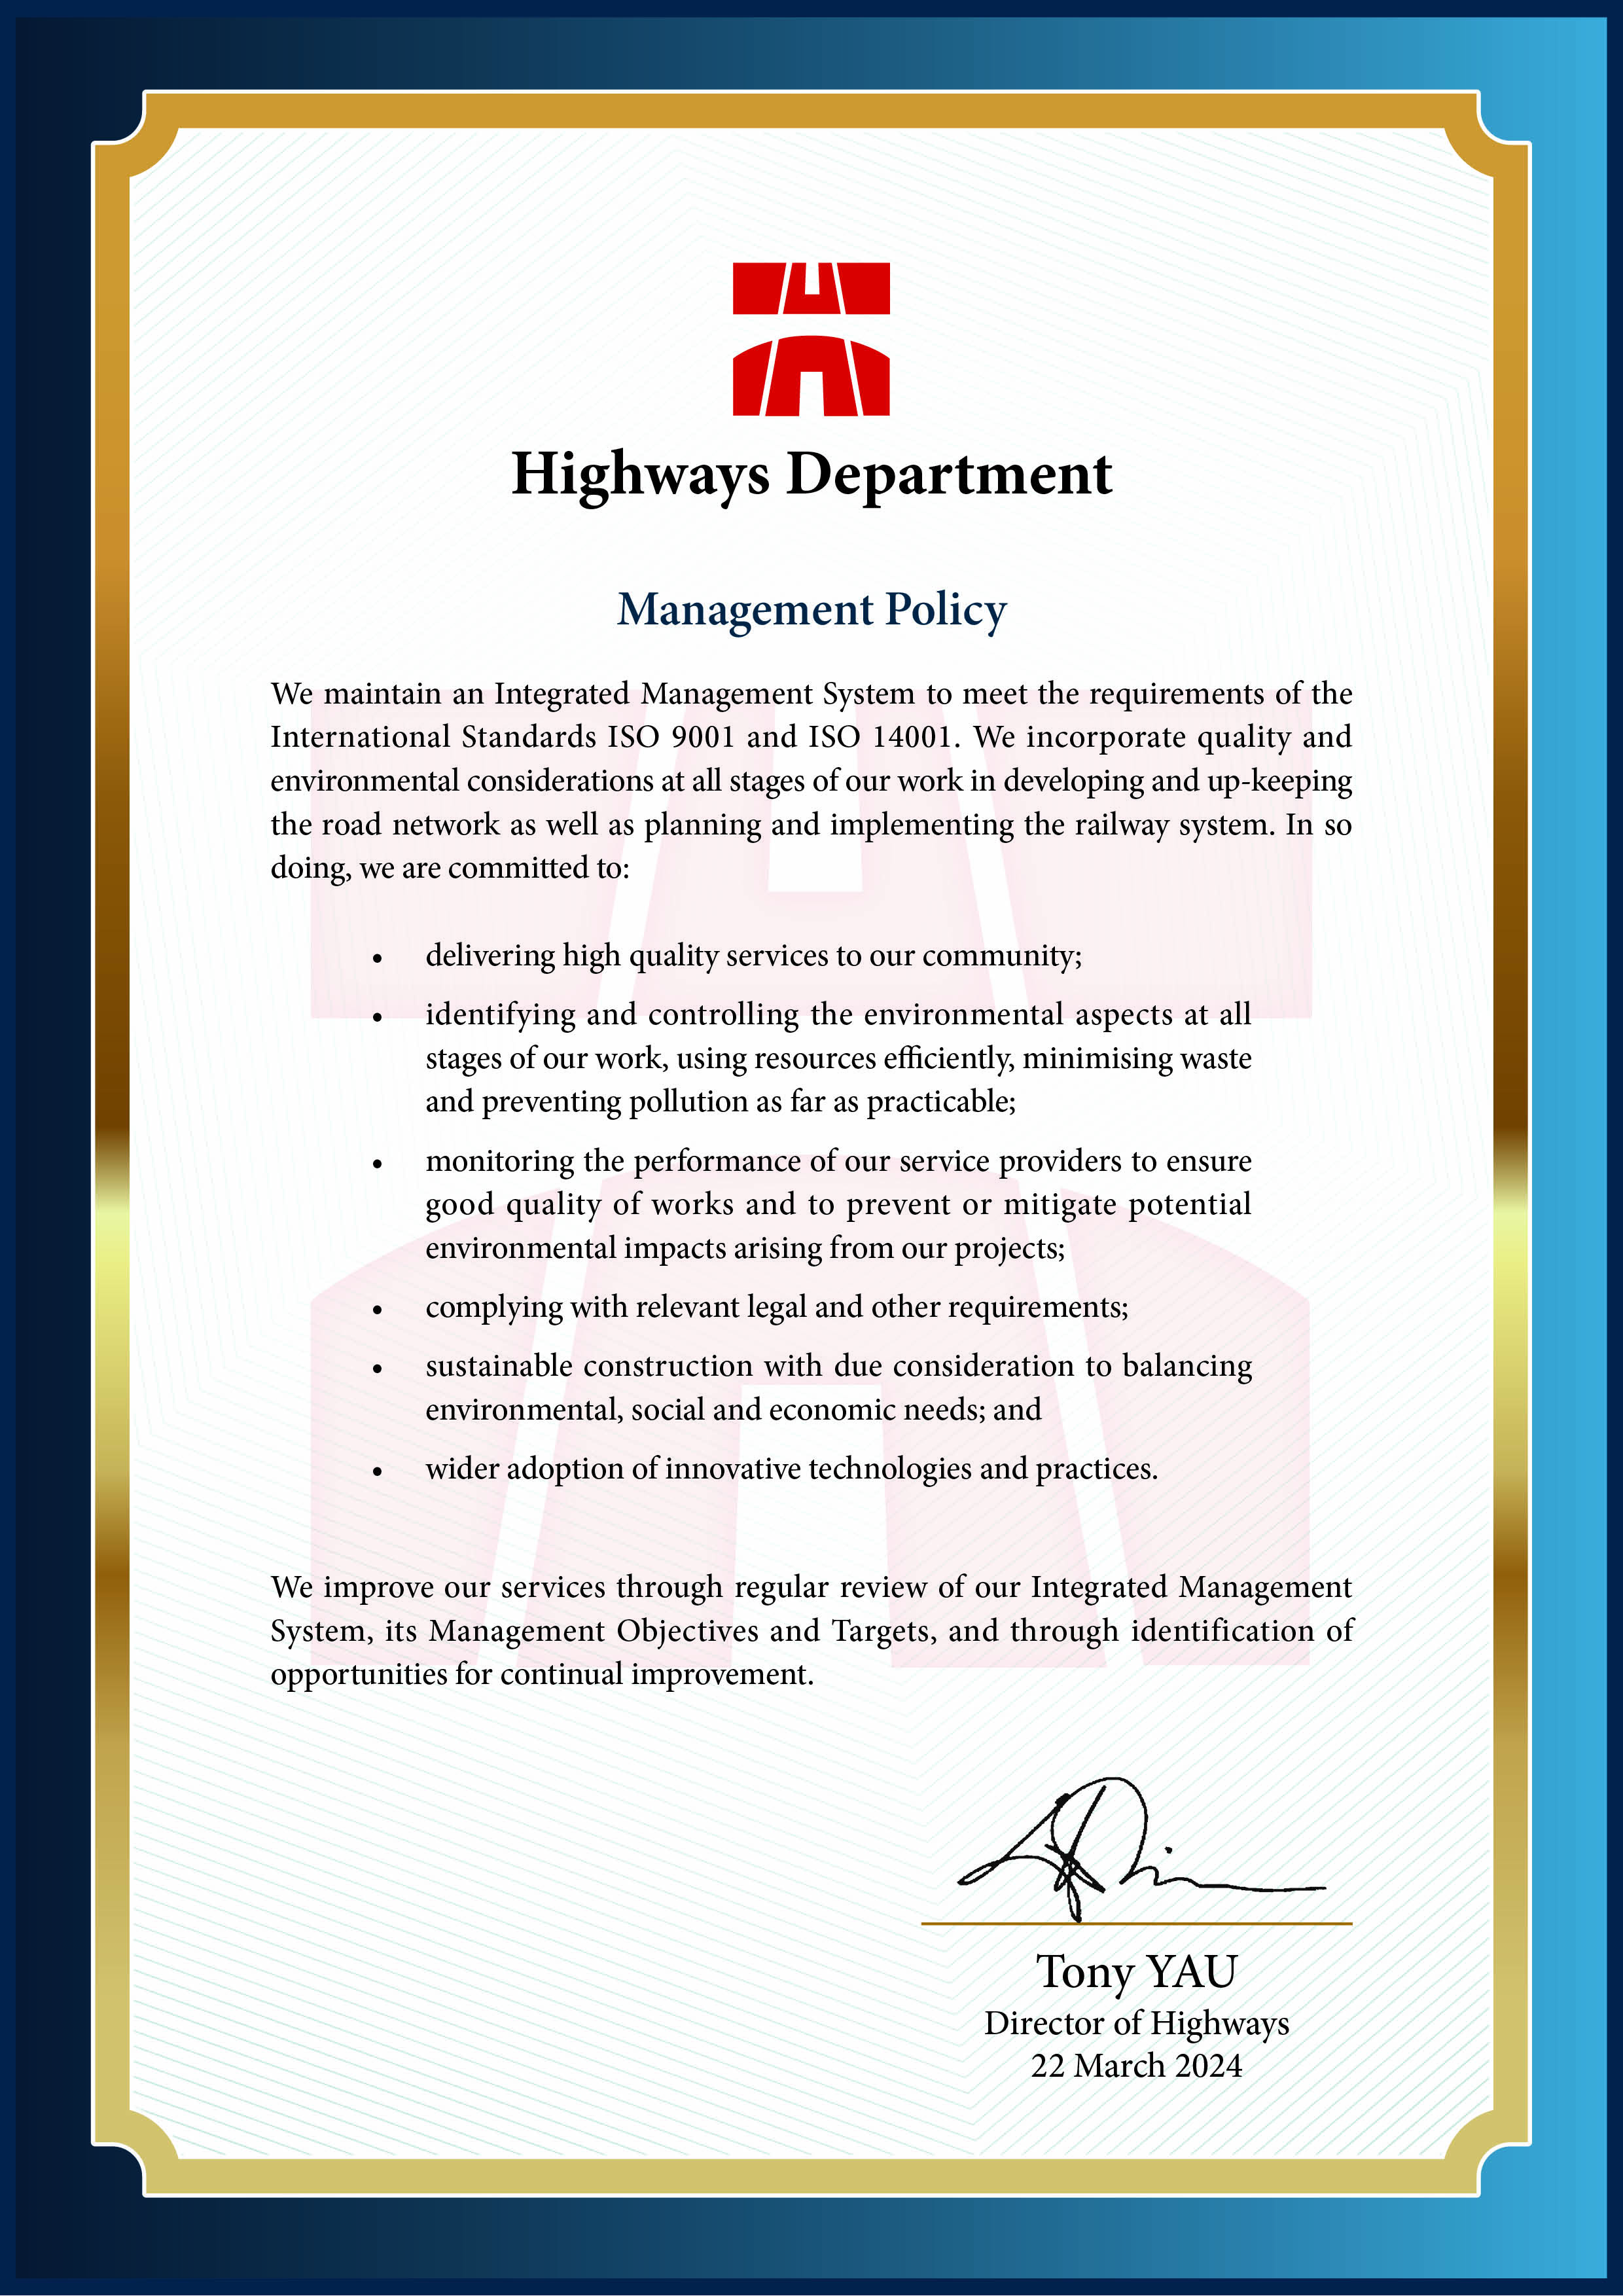 Management Policy